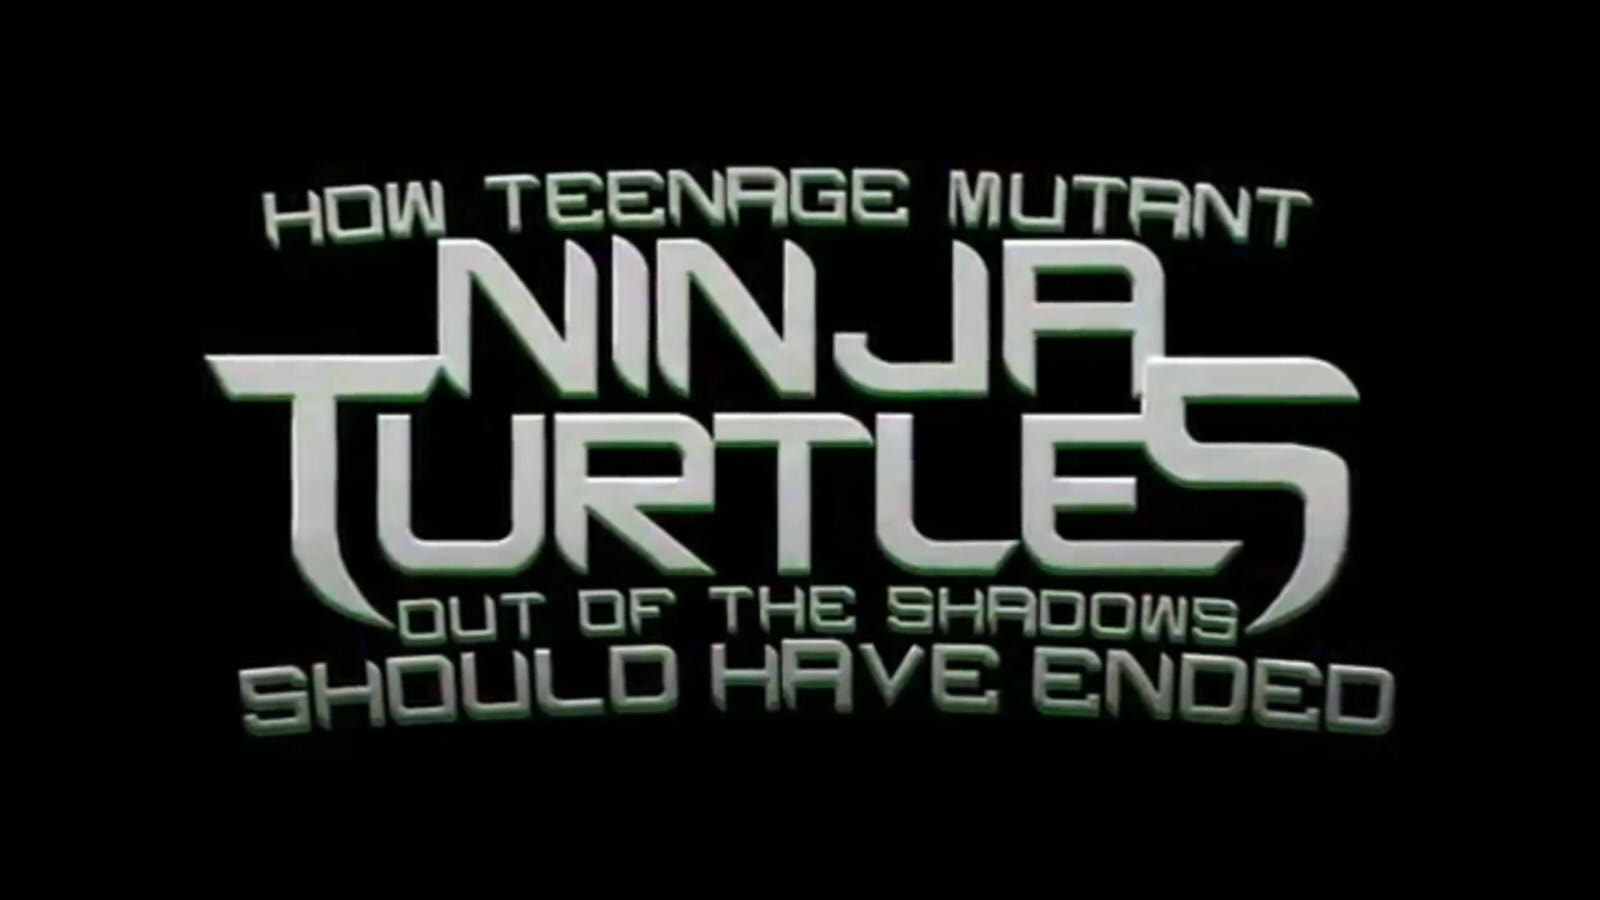 How Teenage Mutant Ninja Turtles: Out of the Shadows Should Have Ended